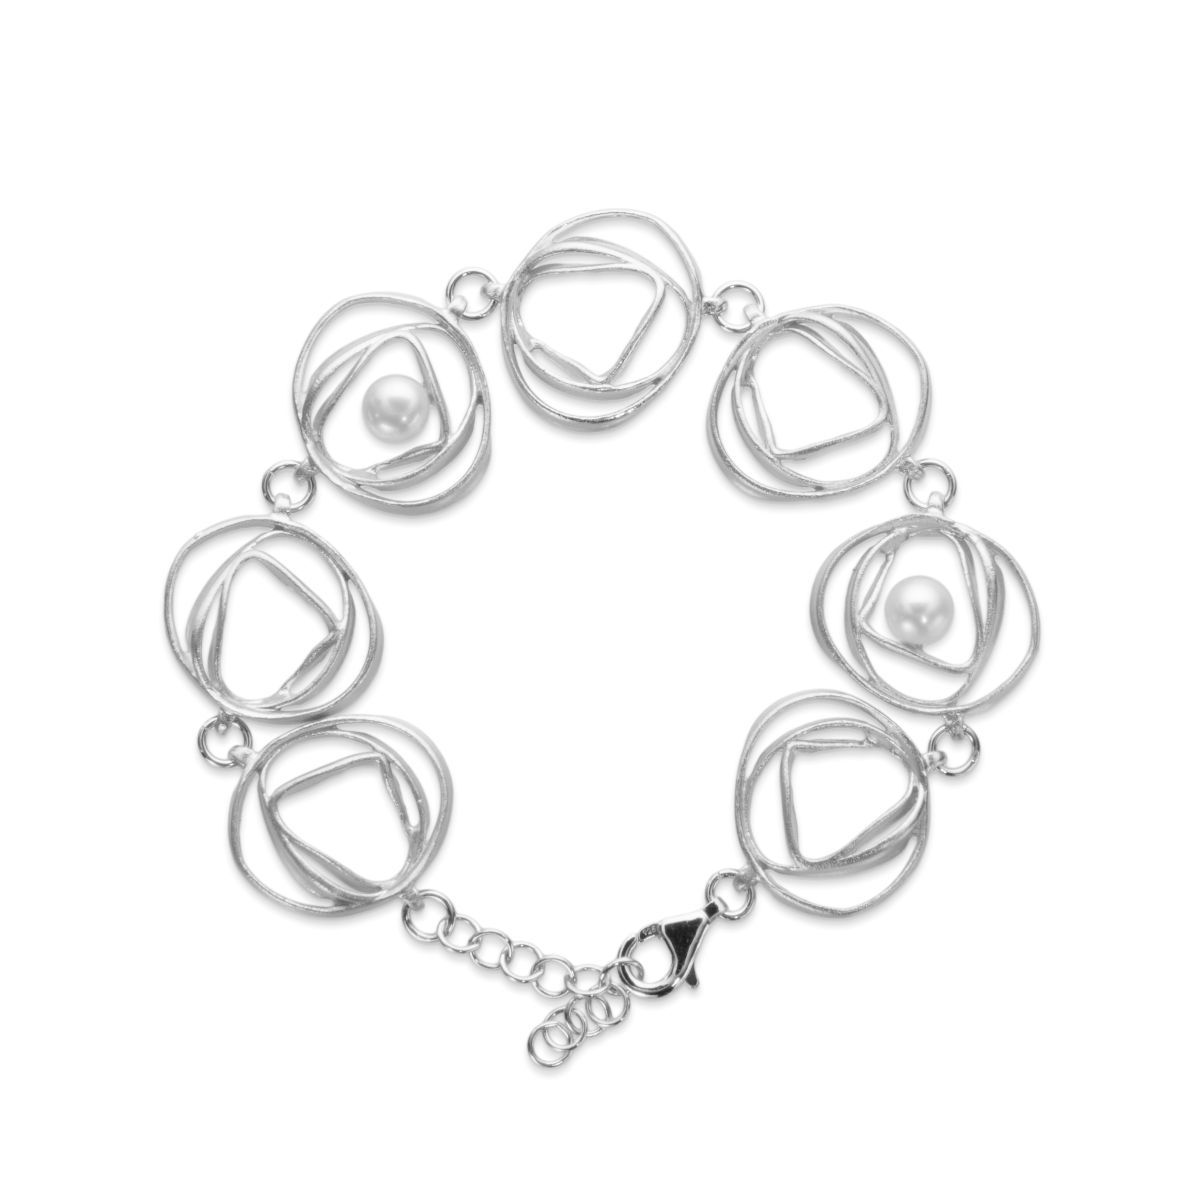 ANDROMEDA BRACELET WITH PEARLS